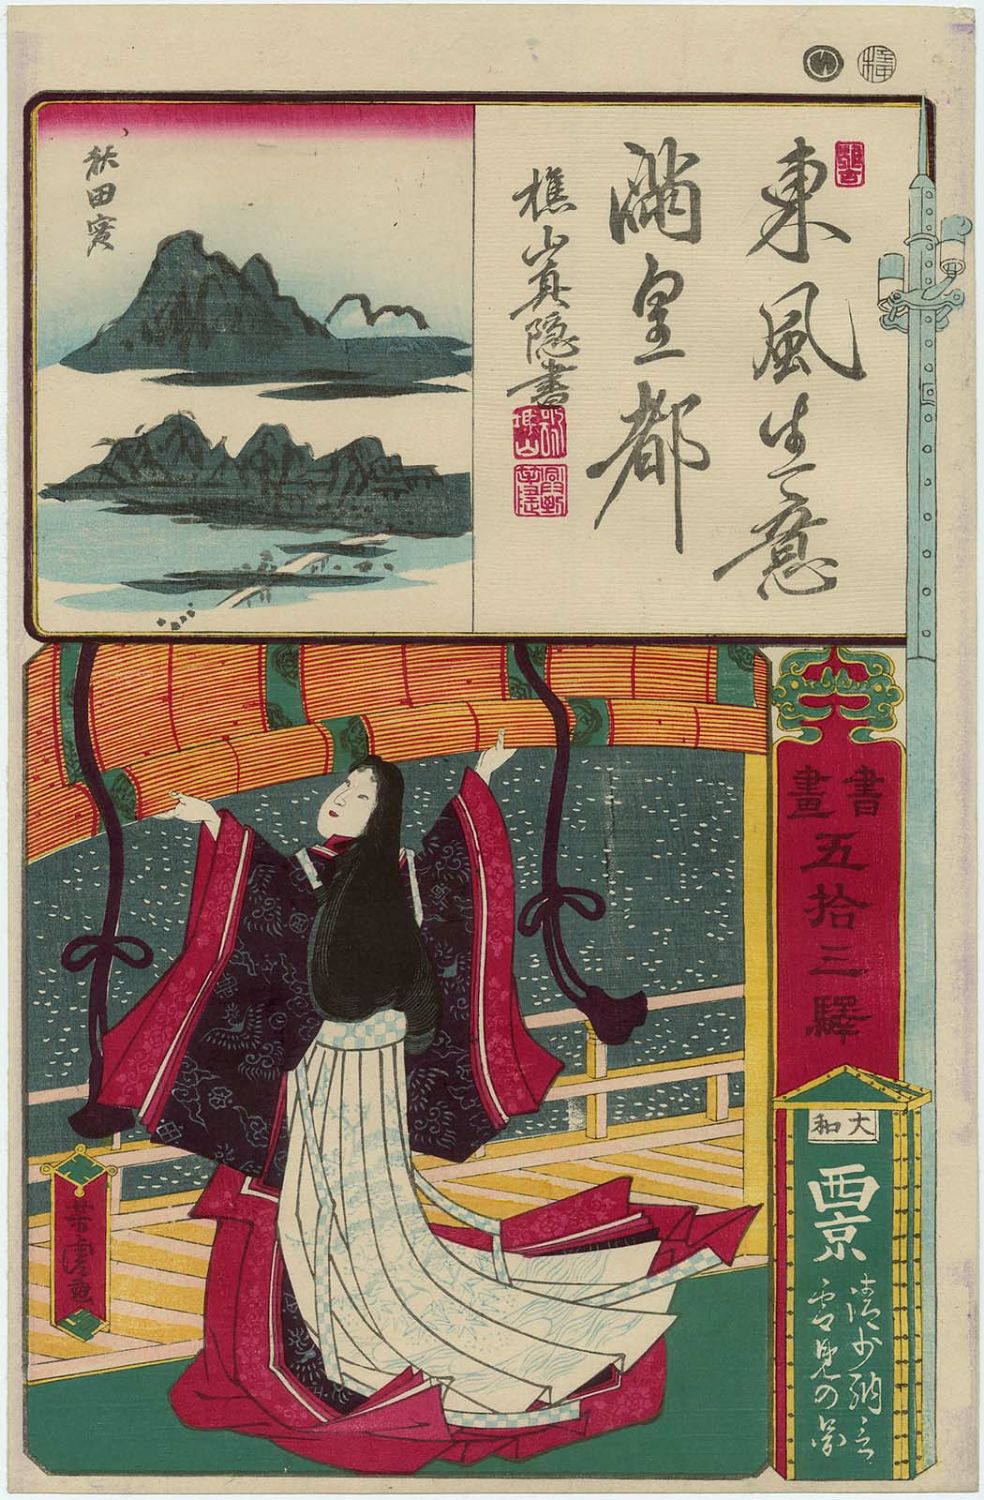 A painting of the author Sei Shonagon in traditional Heian period dress, raising a window blind to look at the falling snow outside.